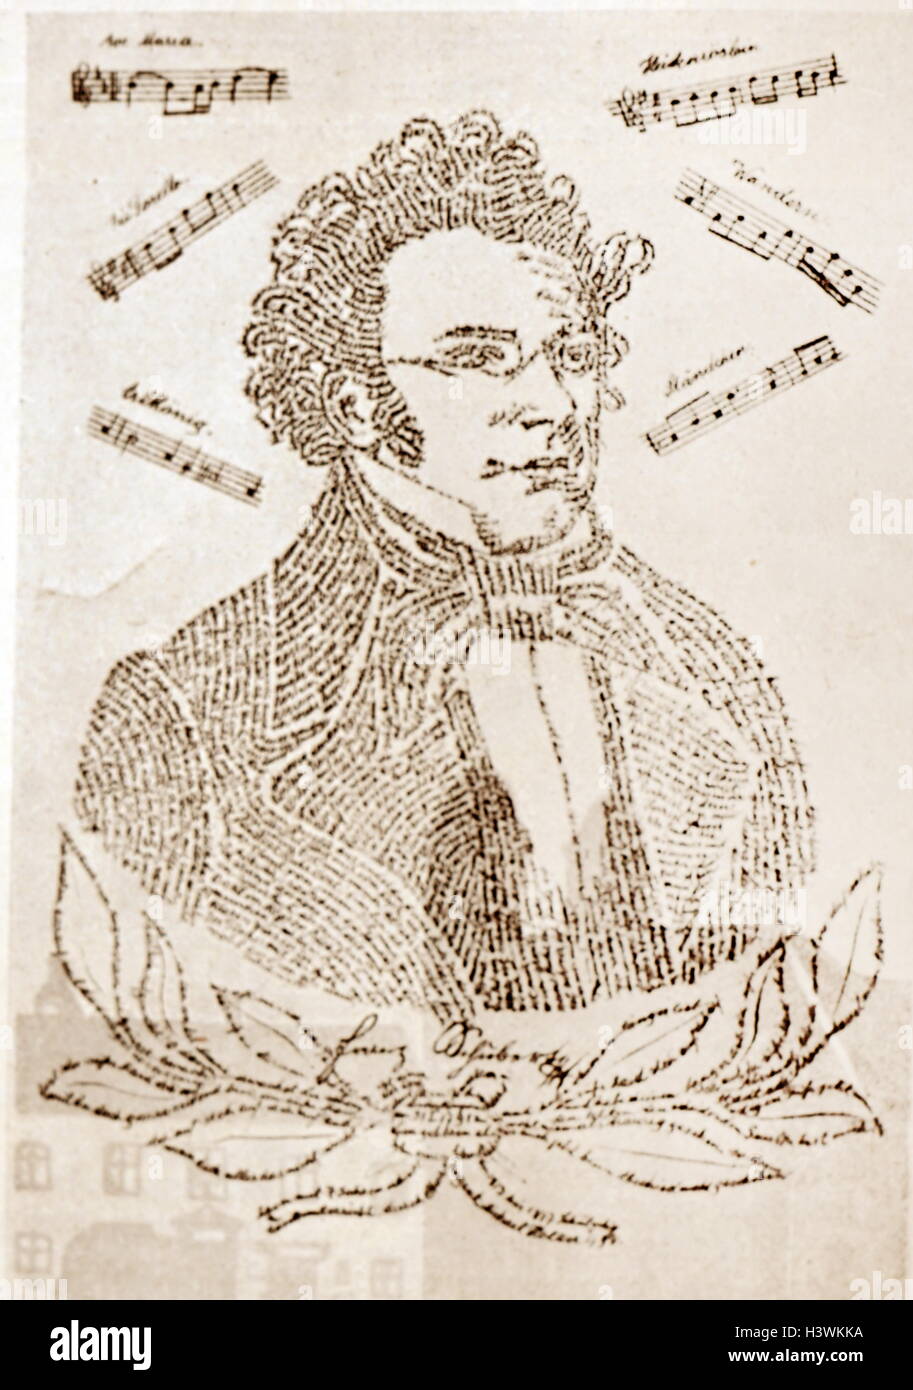 Calligraphic portrait of Franz Schubert (1797-1828) an Austrian composer, consisting of the biography and bibliography. Dated 19th Century Stock Photo